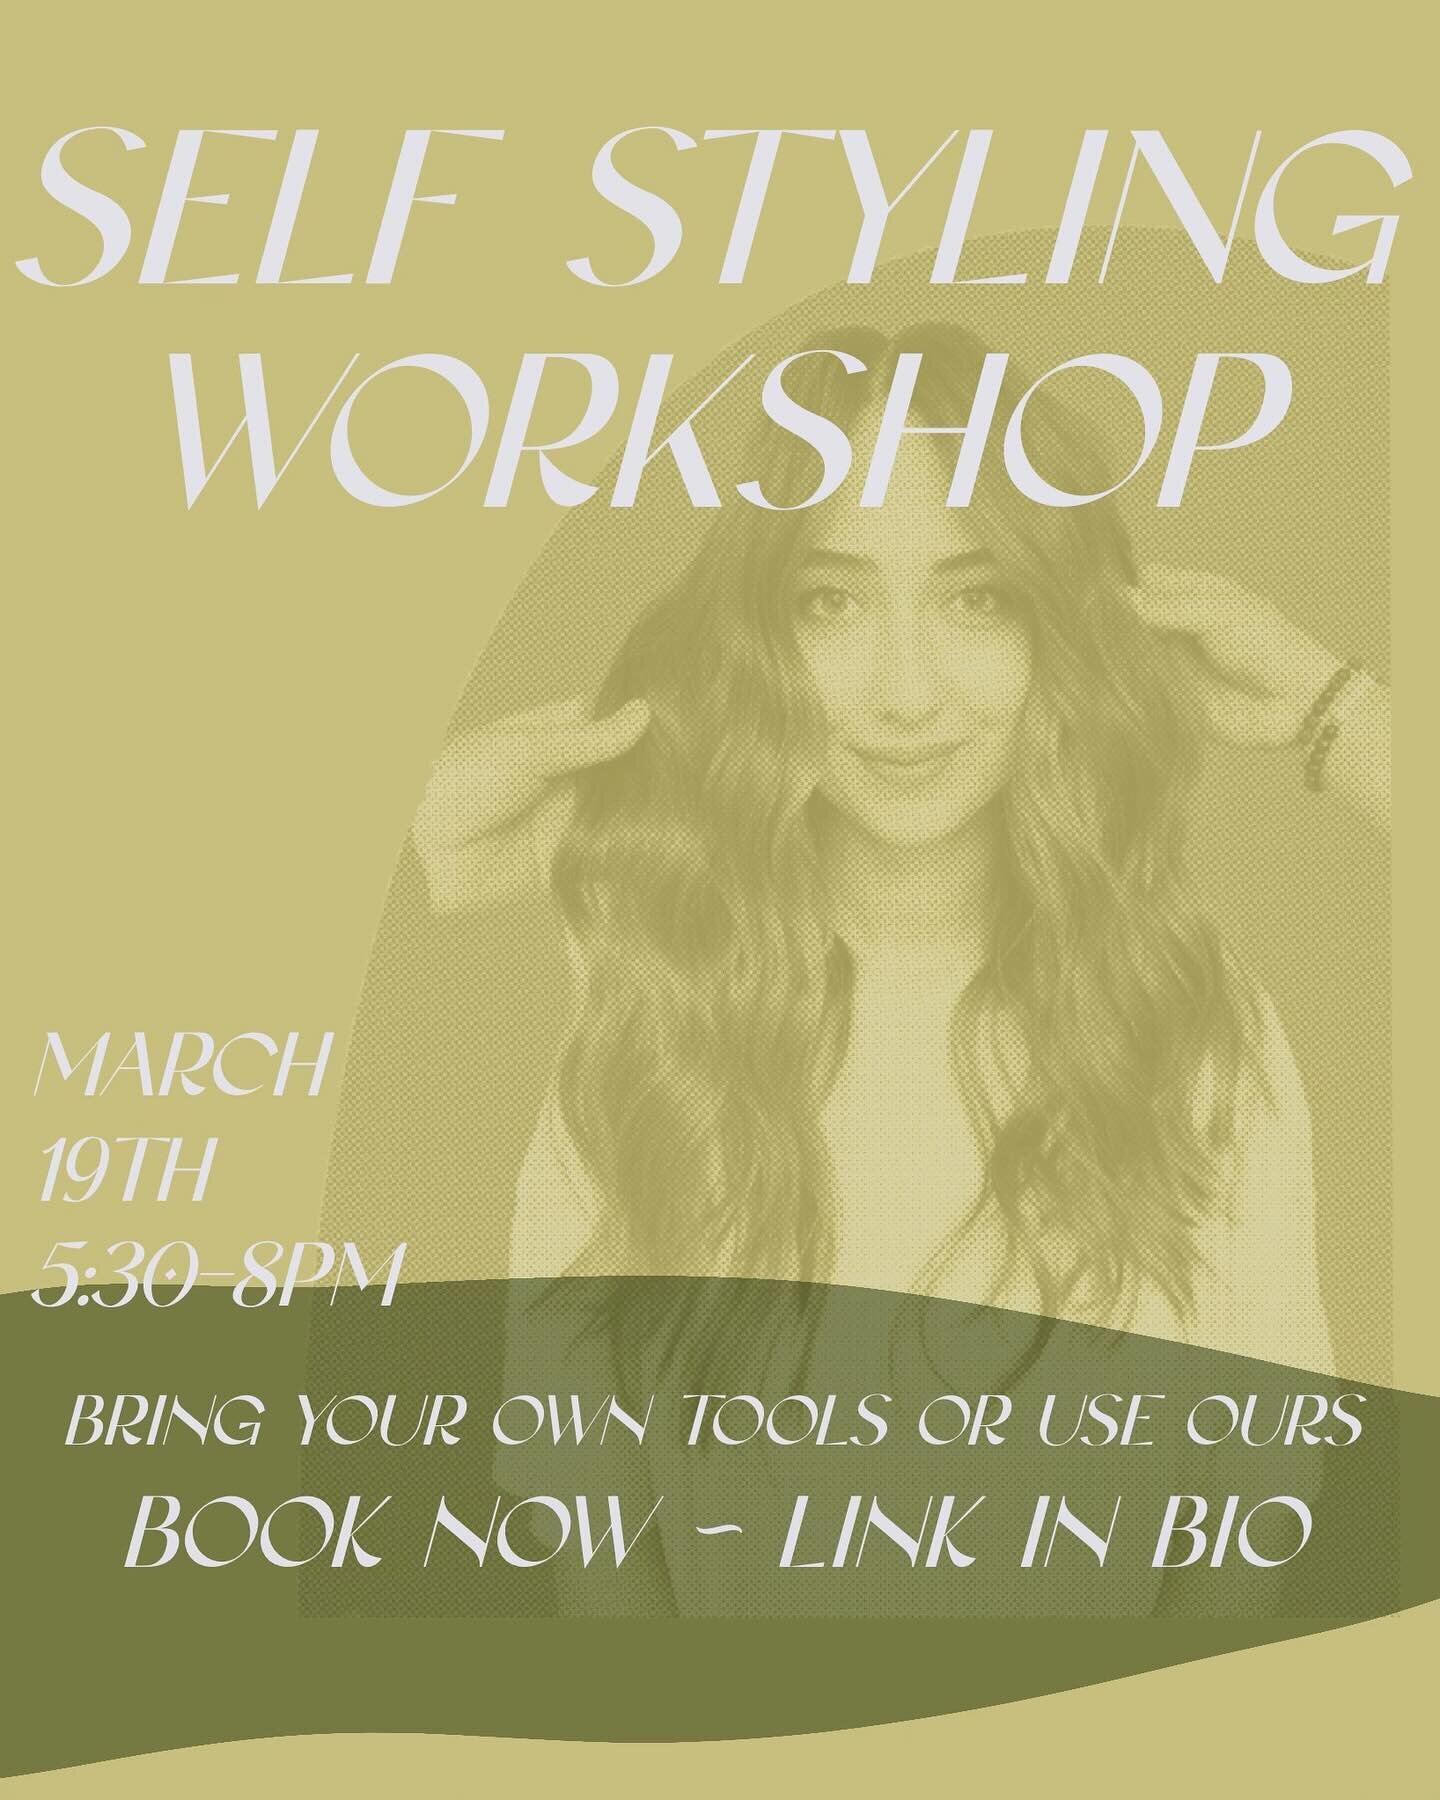 Hey cuties, we are excited to finally host a self styling workshop! Whether you are an existing client or just curious- bring your own tools and products or play around with ours. We want to teach you hands on how to set up a killer air dry, how to d